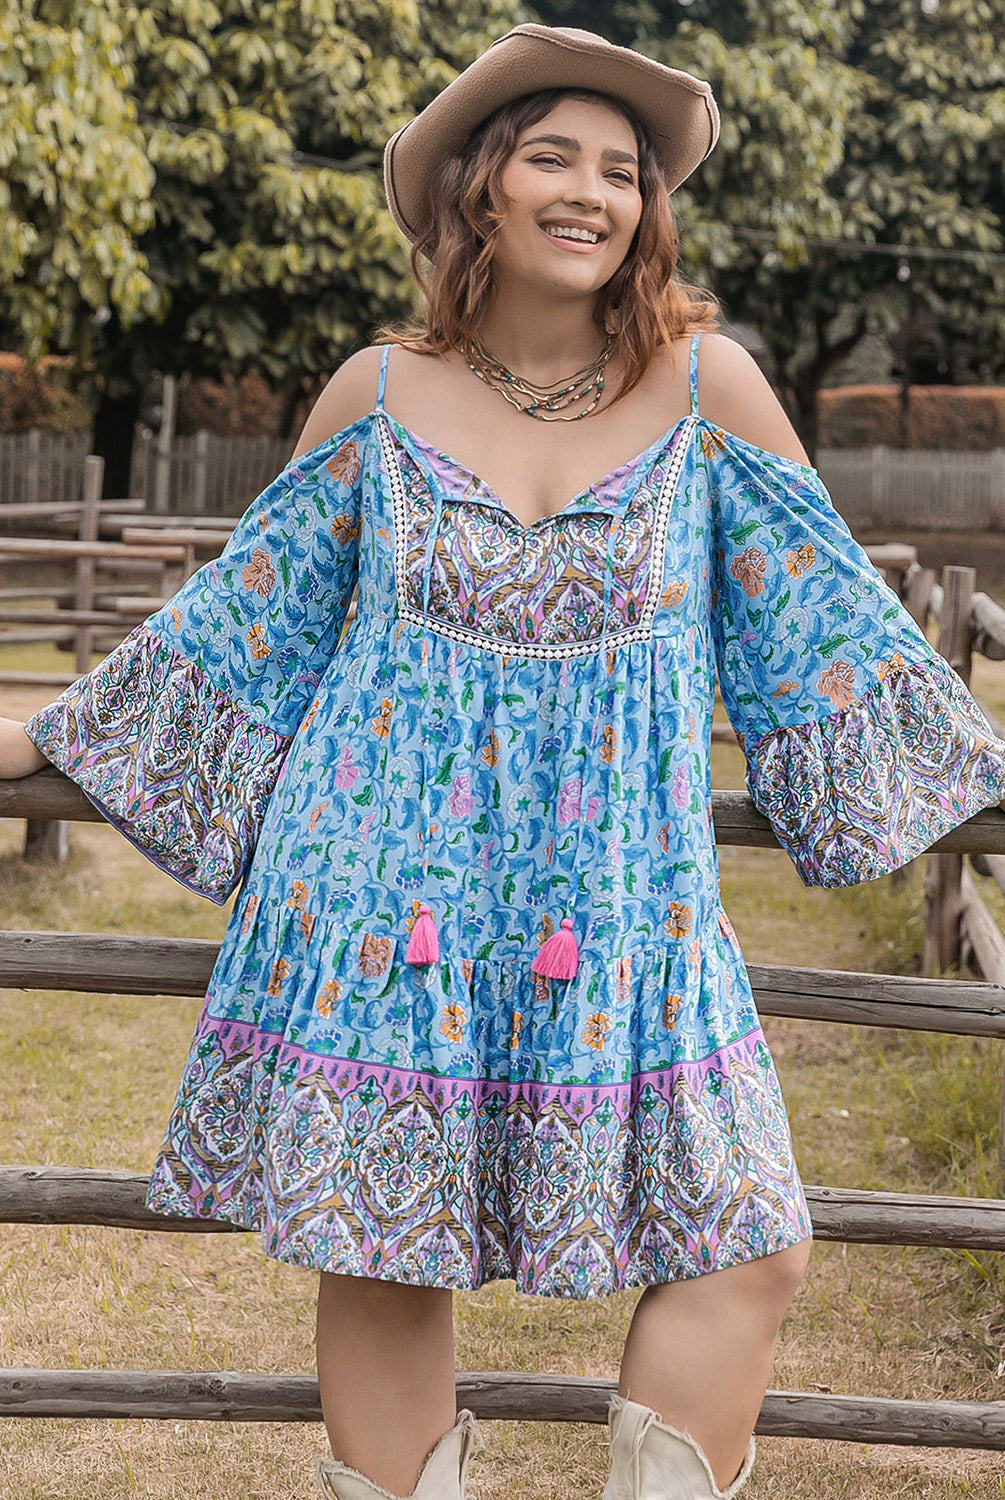 Woman wearing a plus size printed mini dress with long sleeves, featuring coral and sky blue colors, standing outdoors.